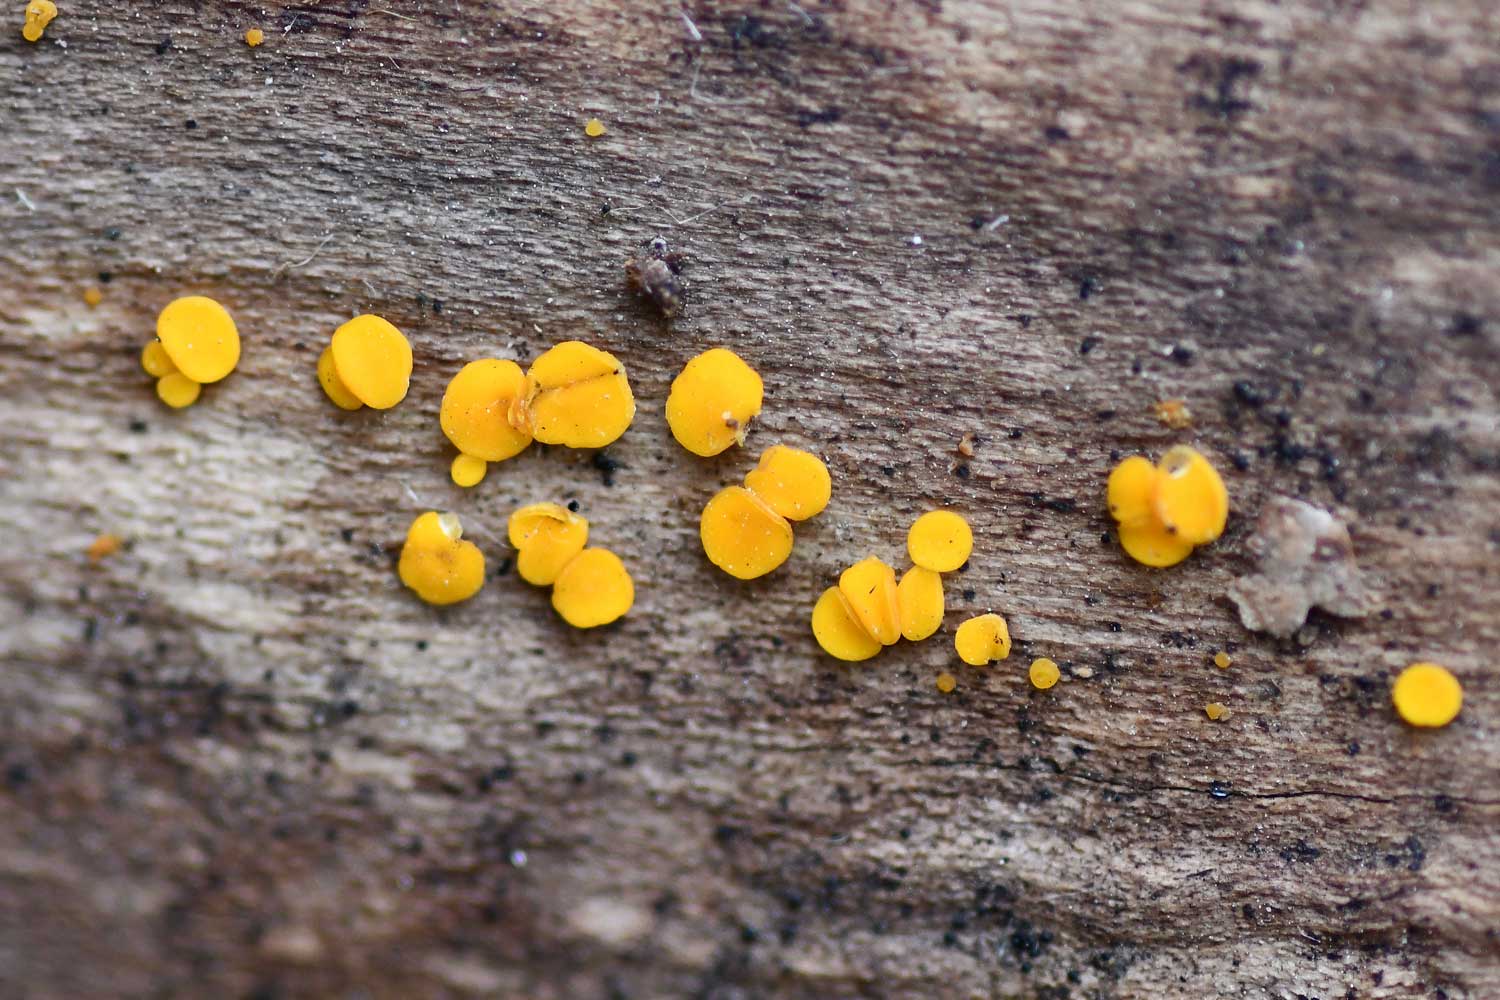 A cluster of small yellow fairy car fungi on a log.